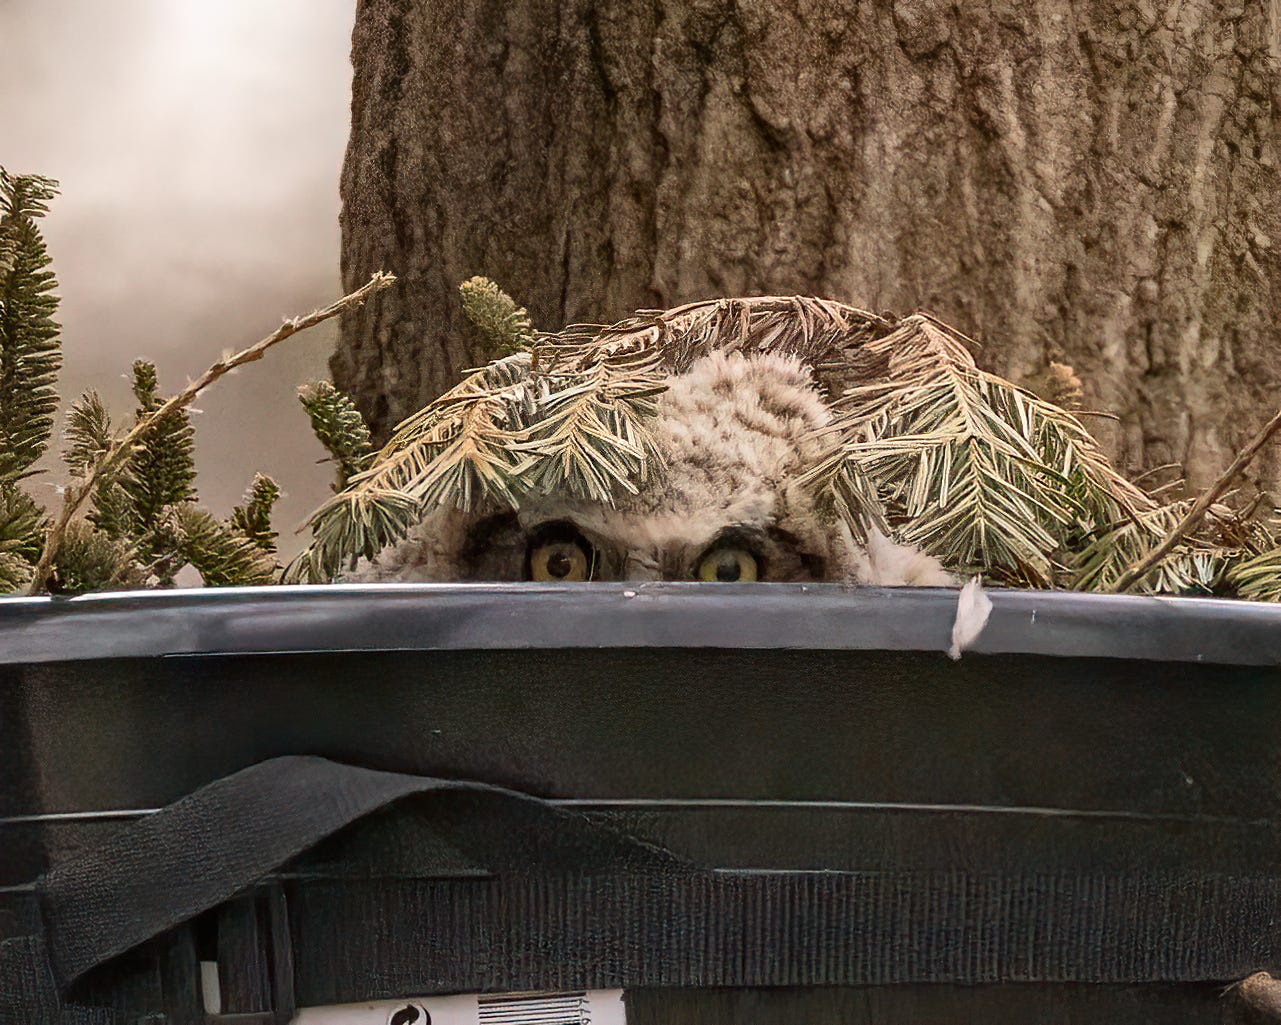 In this image, the owl is peering out over the edge of the tub. There are pine branches on its head, so only the eyes and some fluffy feathers are visible. It is very funny!